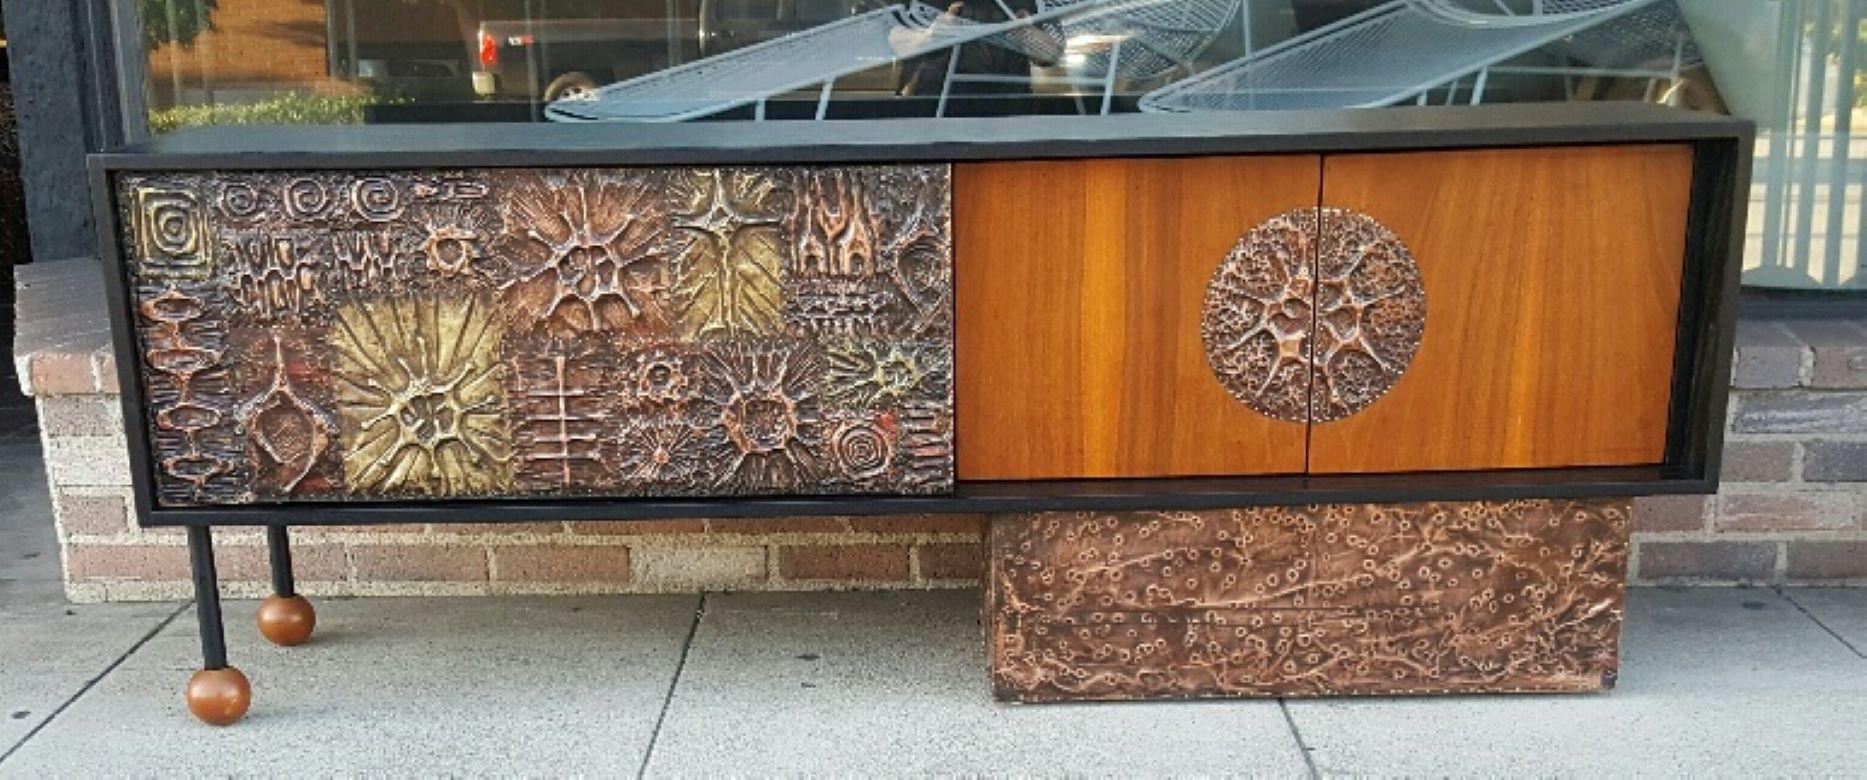 1970 Mid-Century Modern Walnut Credenza with Brutal Copper Tiles by Lou Ramirez 5